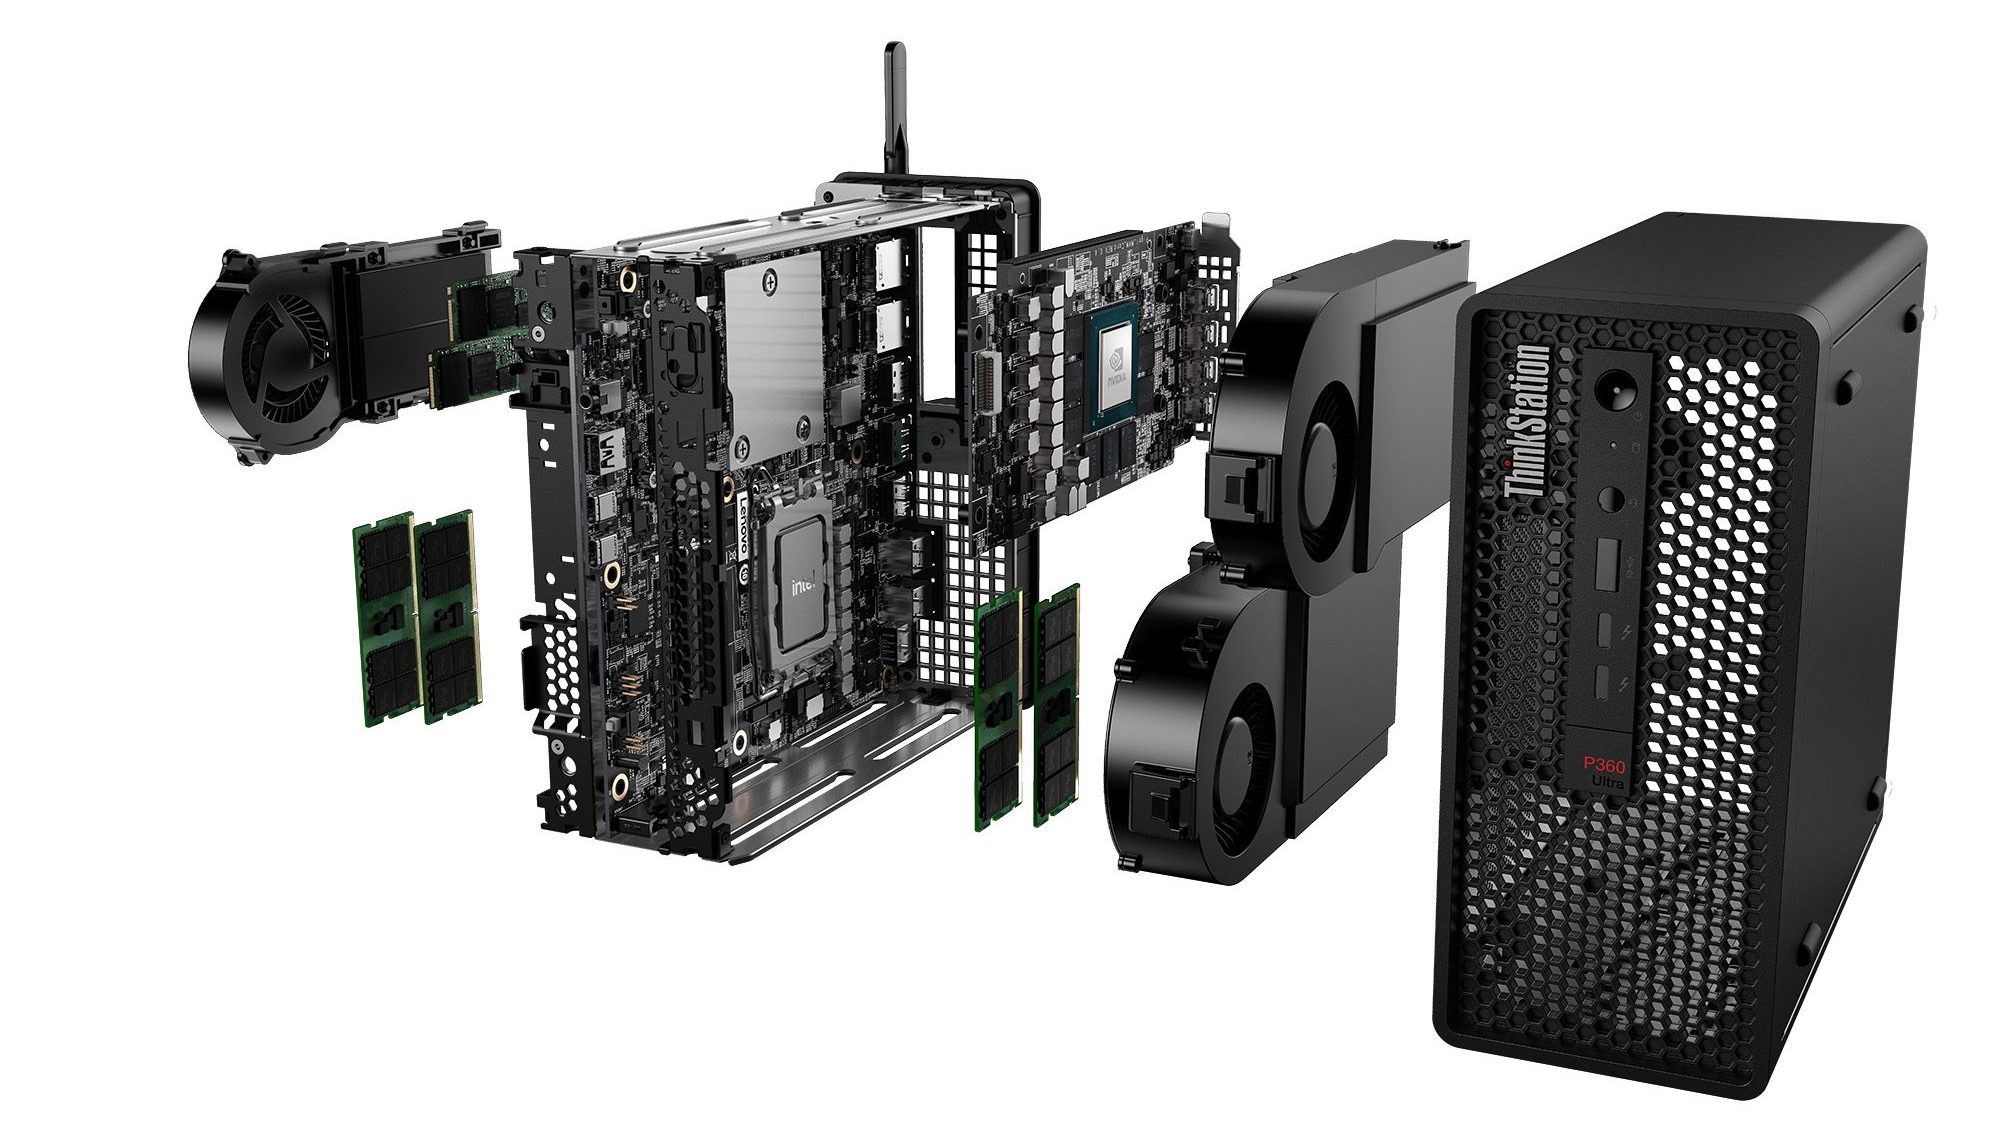 Product Review: NVIDIA RTX A2000 GPU for Workstations - Page 2 of